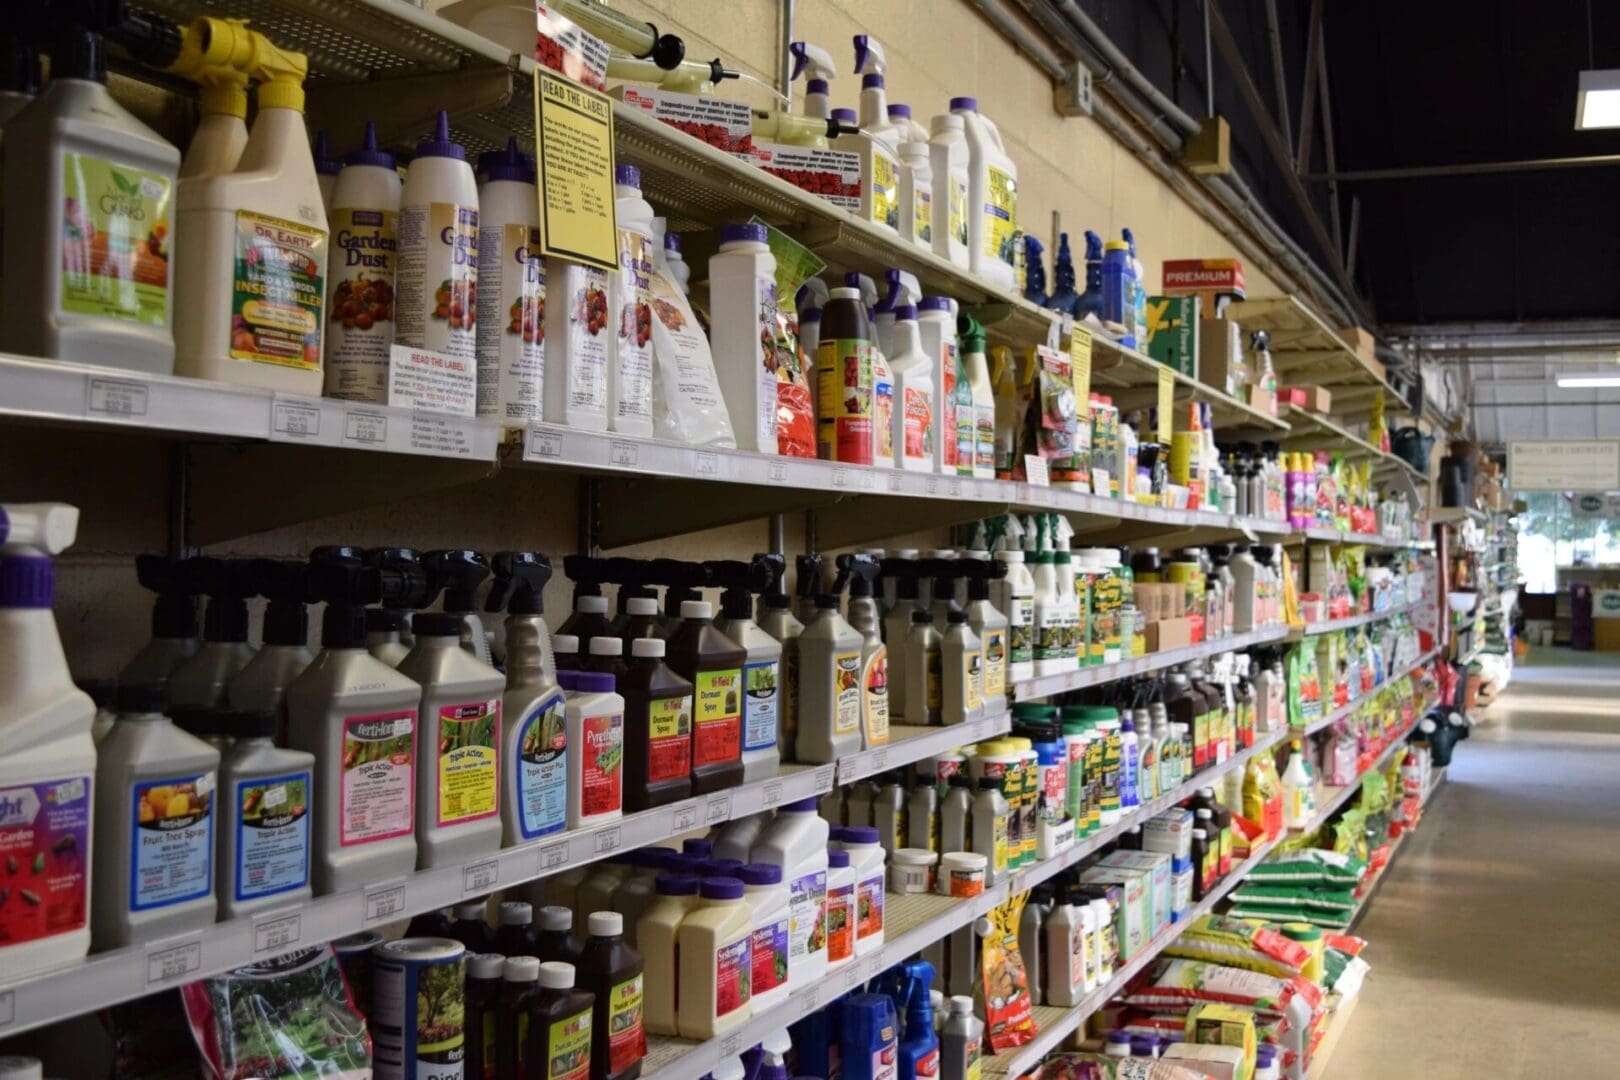 Aisle in a store stocked with various garden supplies and pest control products on shelves.